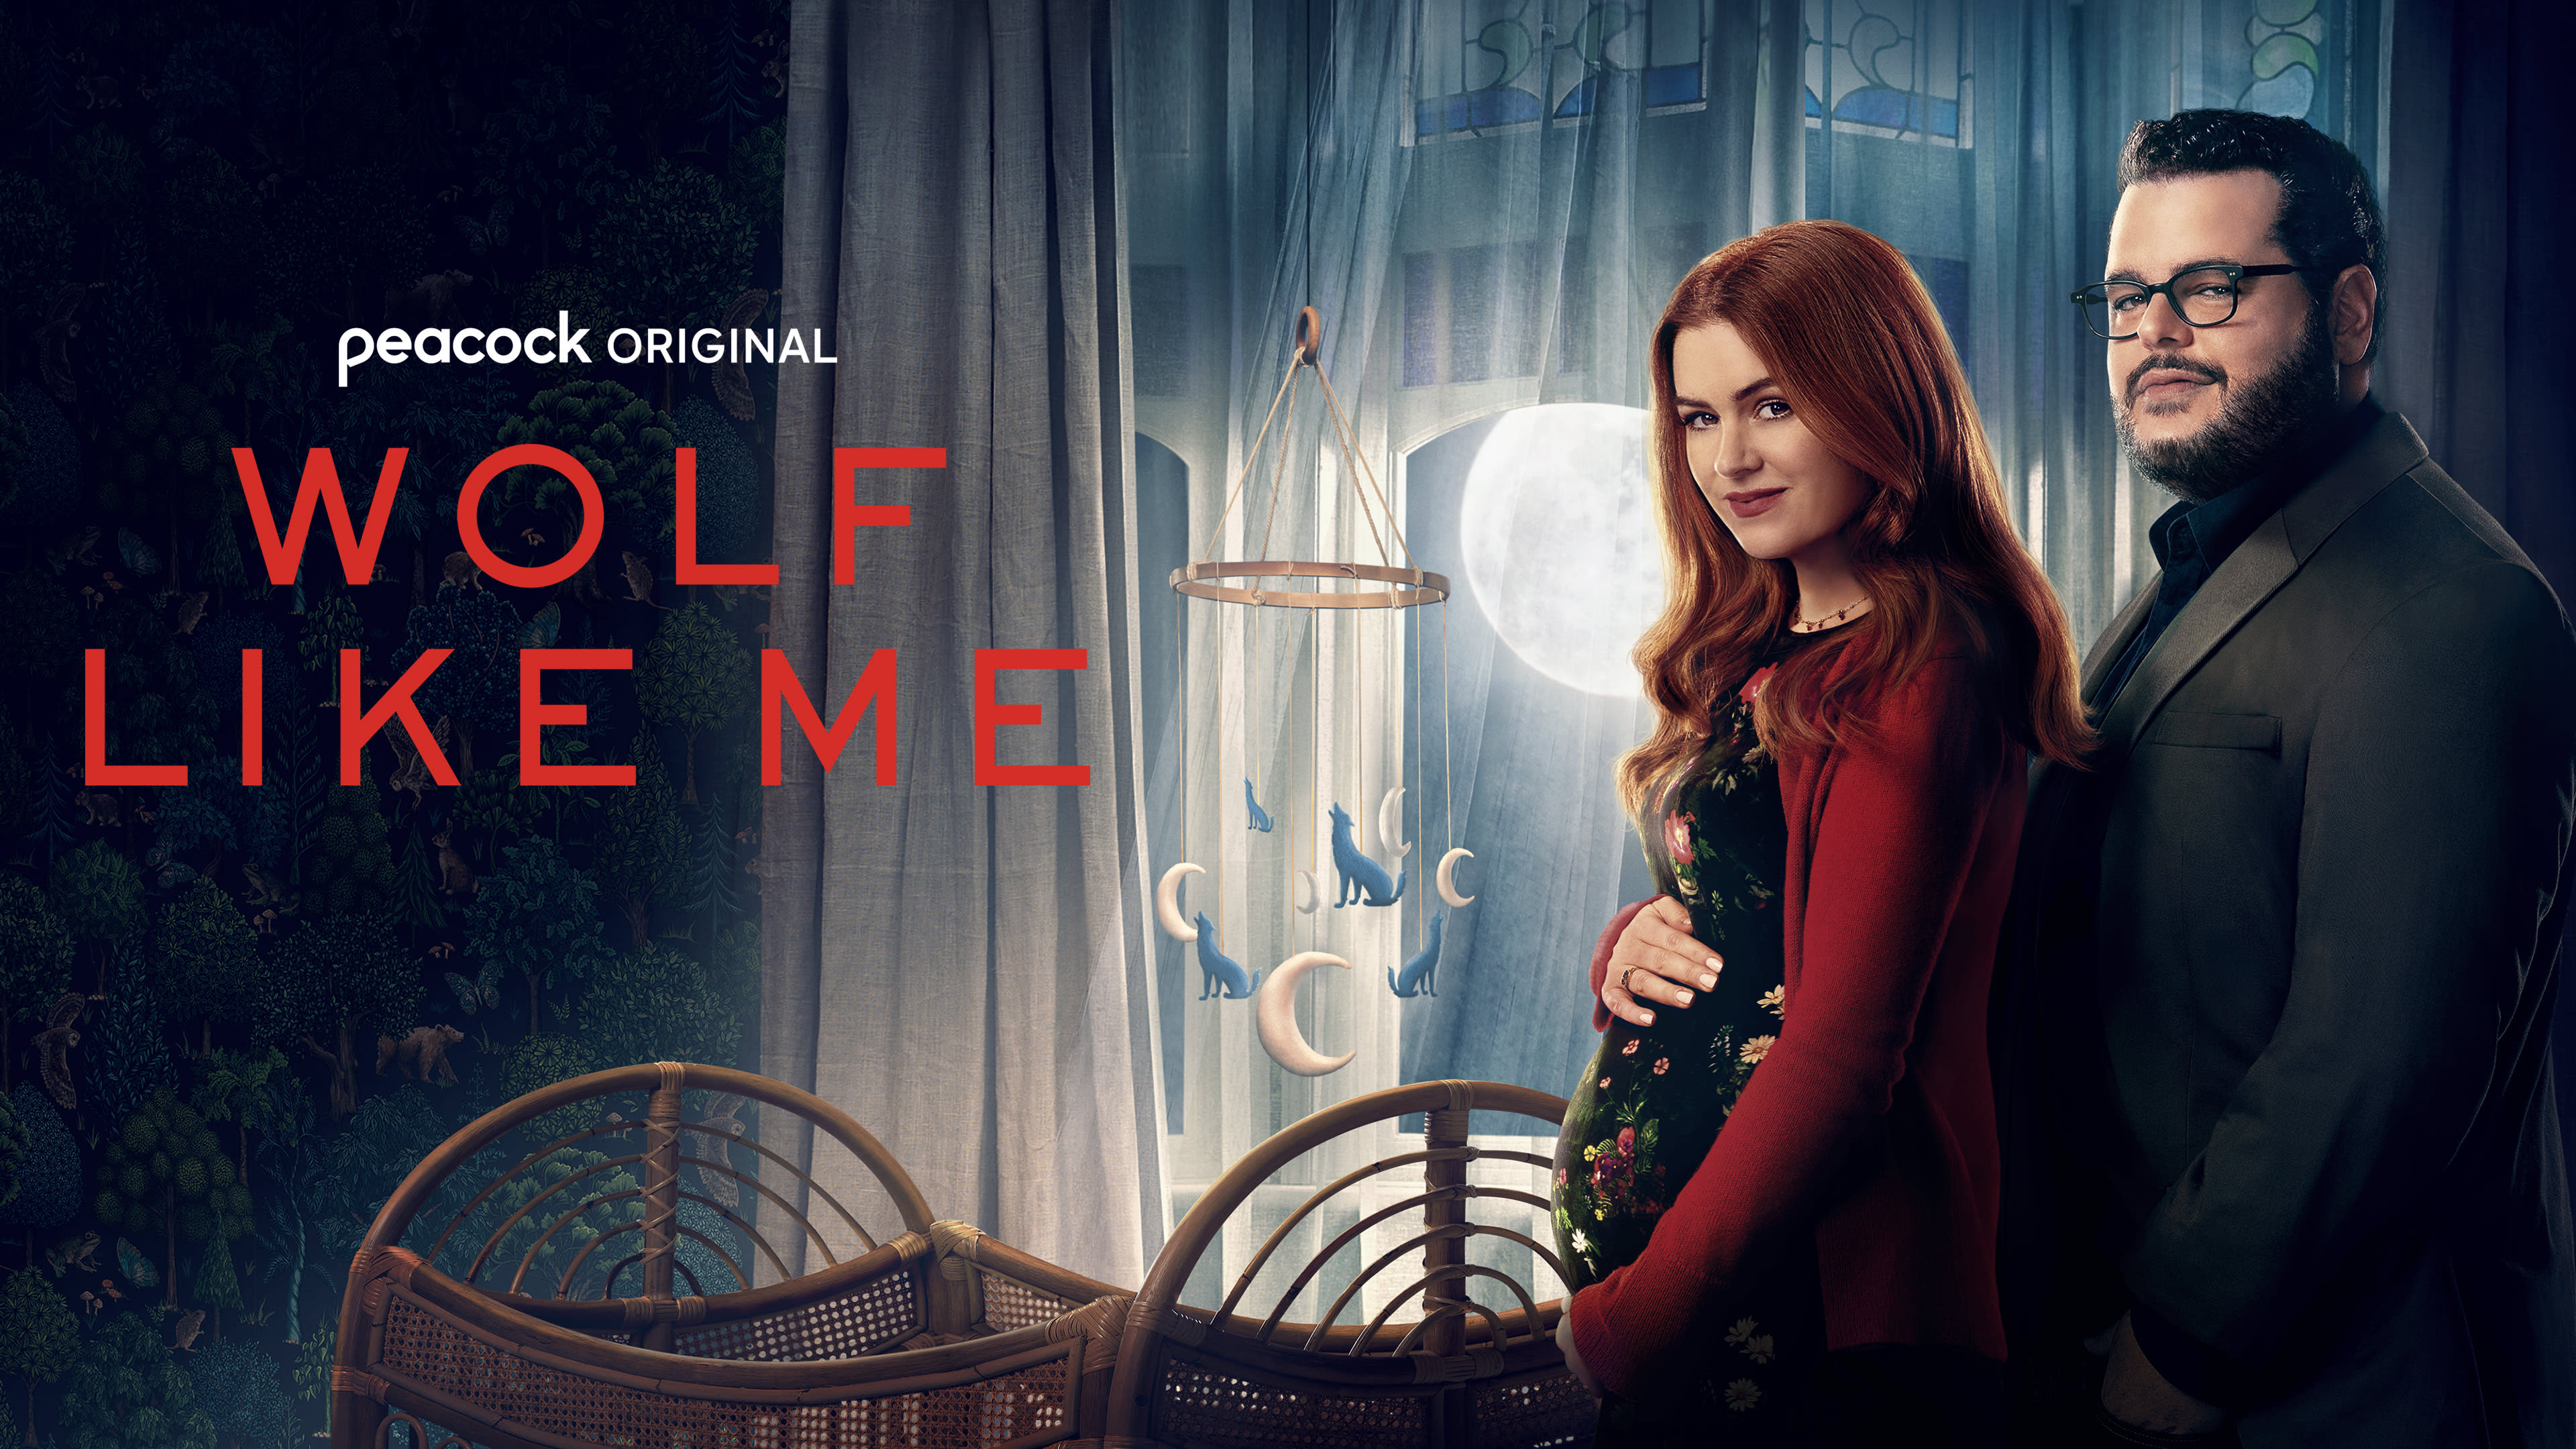 Wolf Like Me' Season 2 Ending Explained - Does Mary Give Birth to a Wolf?